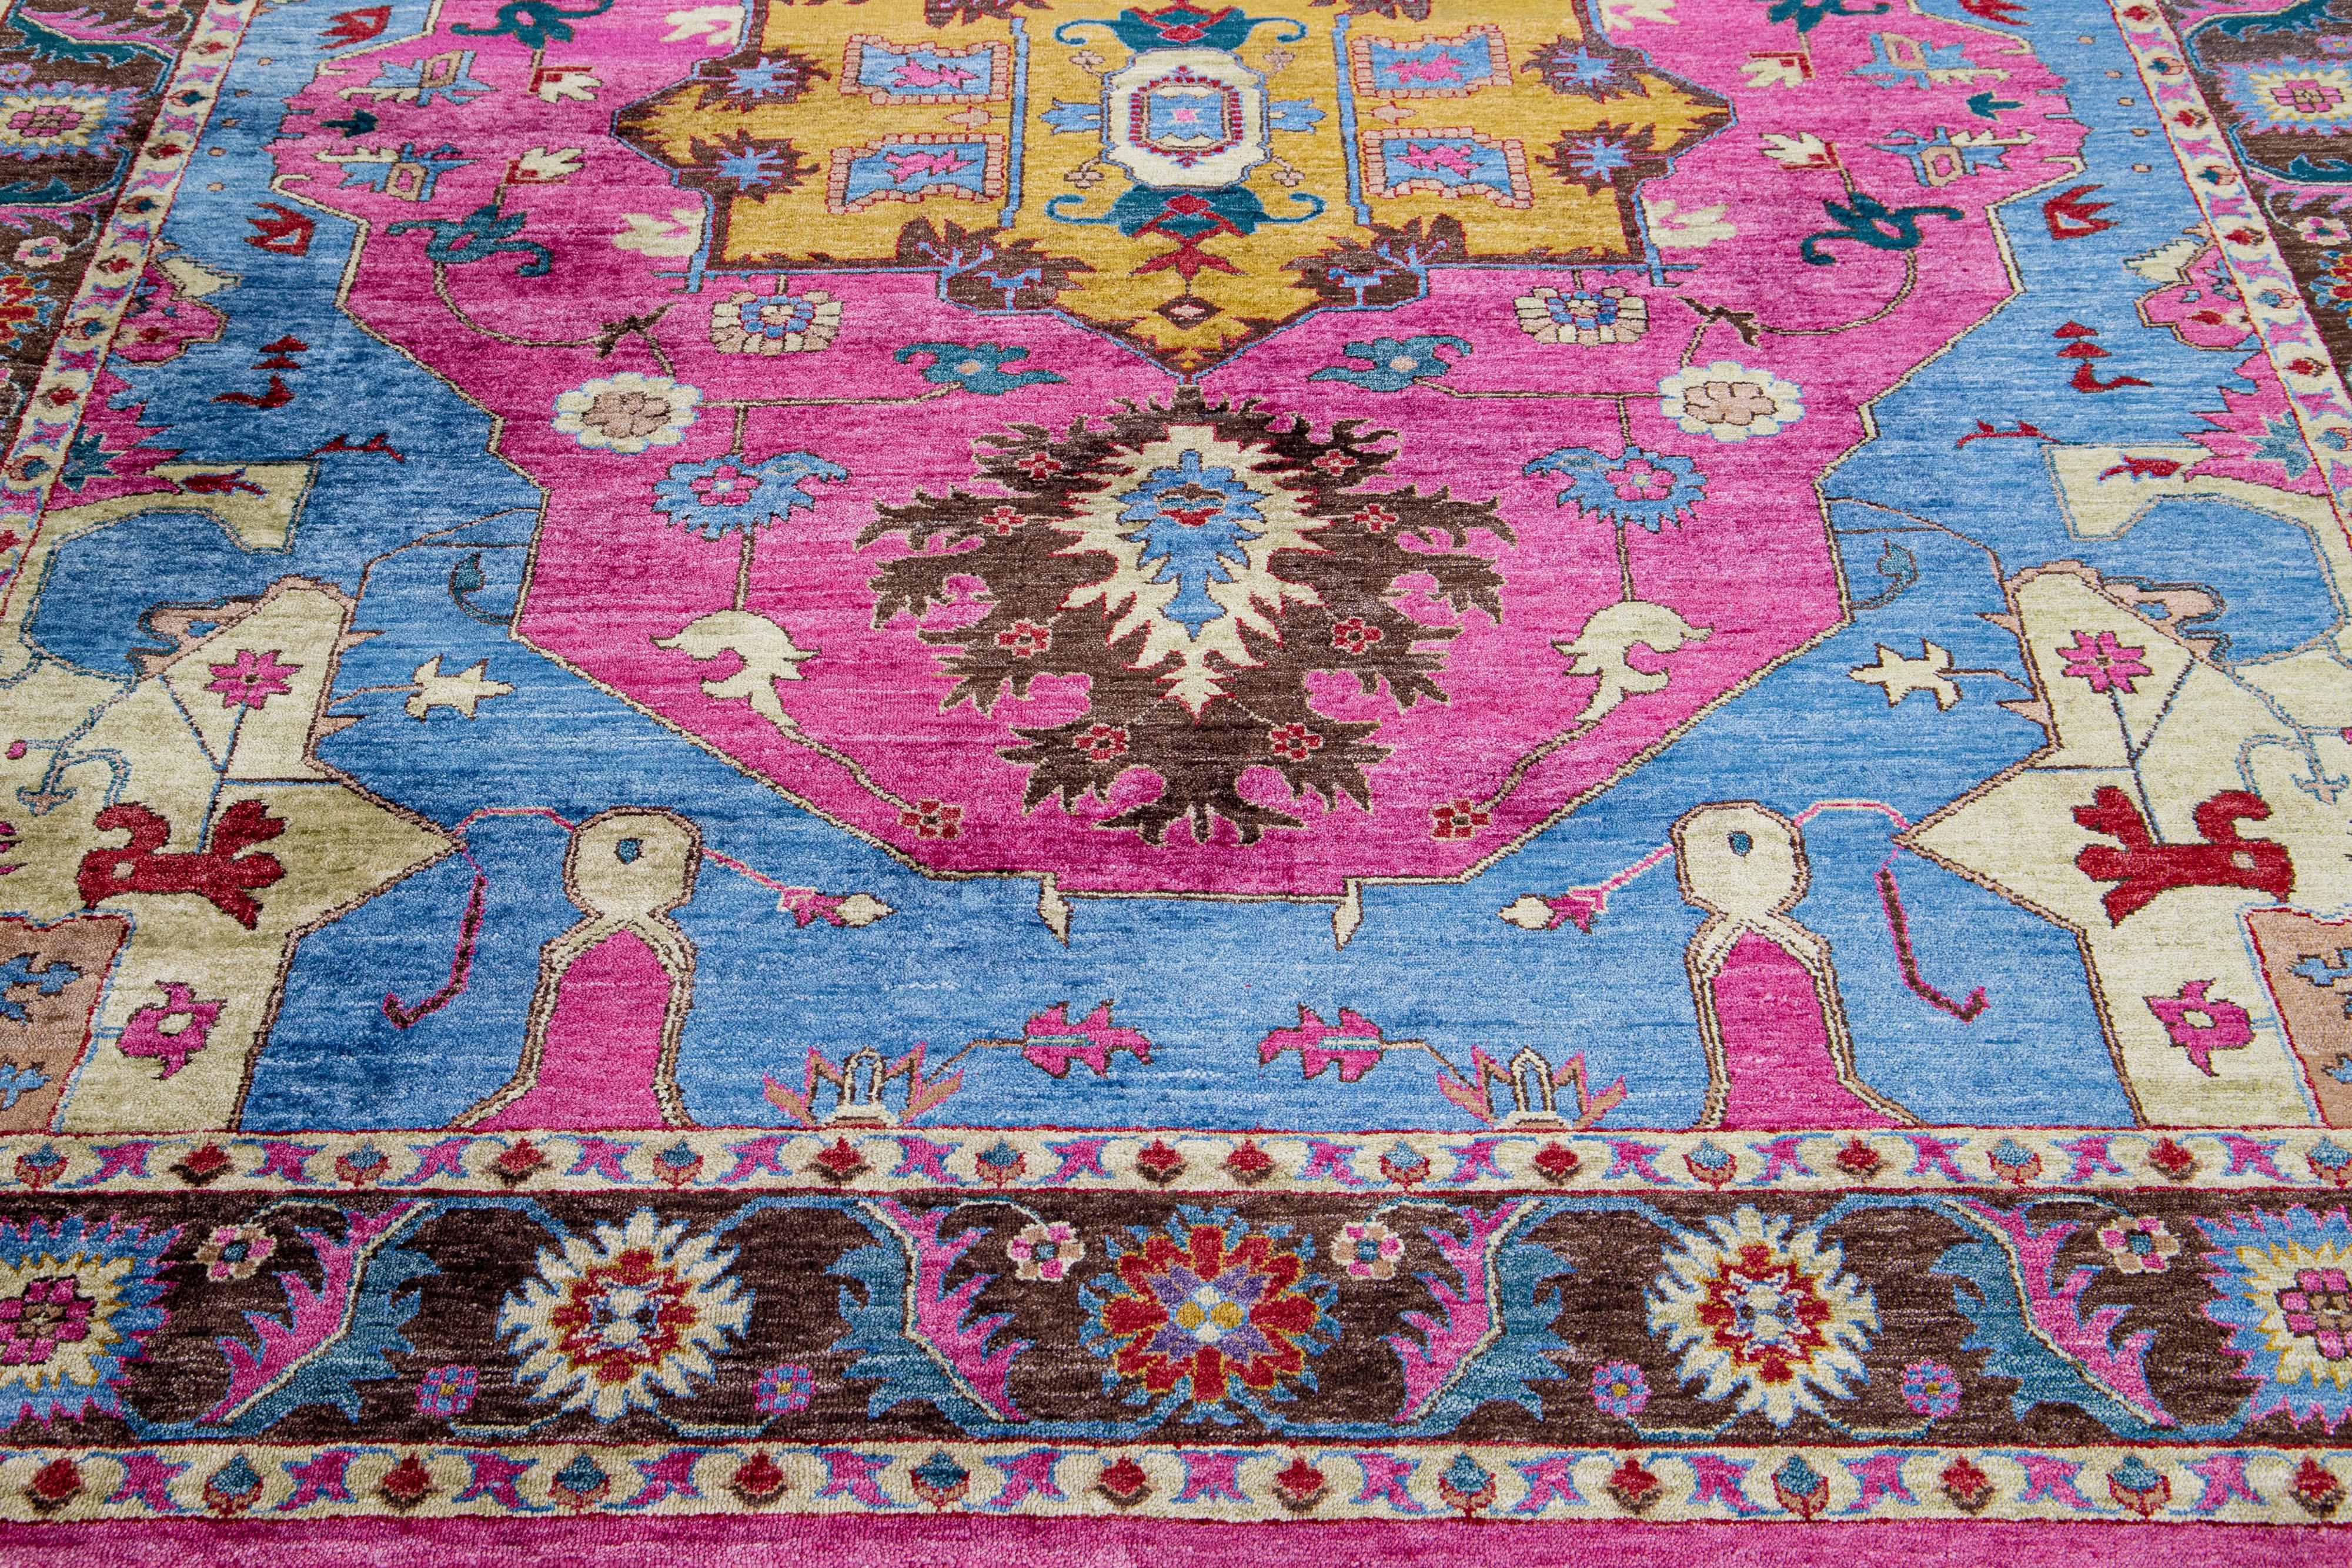 Stunning in its contemporary style, this silk rug showcases a mesmerizing all-over design in a captivating shade of blue. Its allure is heightened by the exquisitely crafted pink accents that effortlessly harmonize with the distinctive medallion